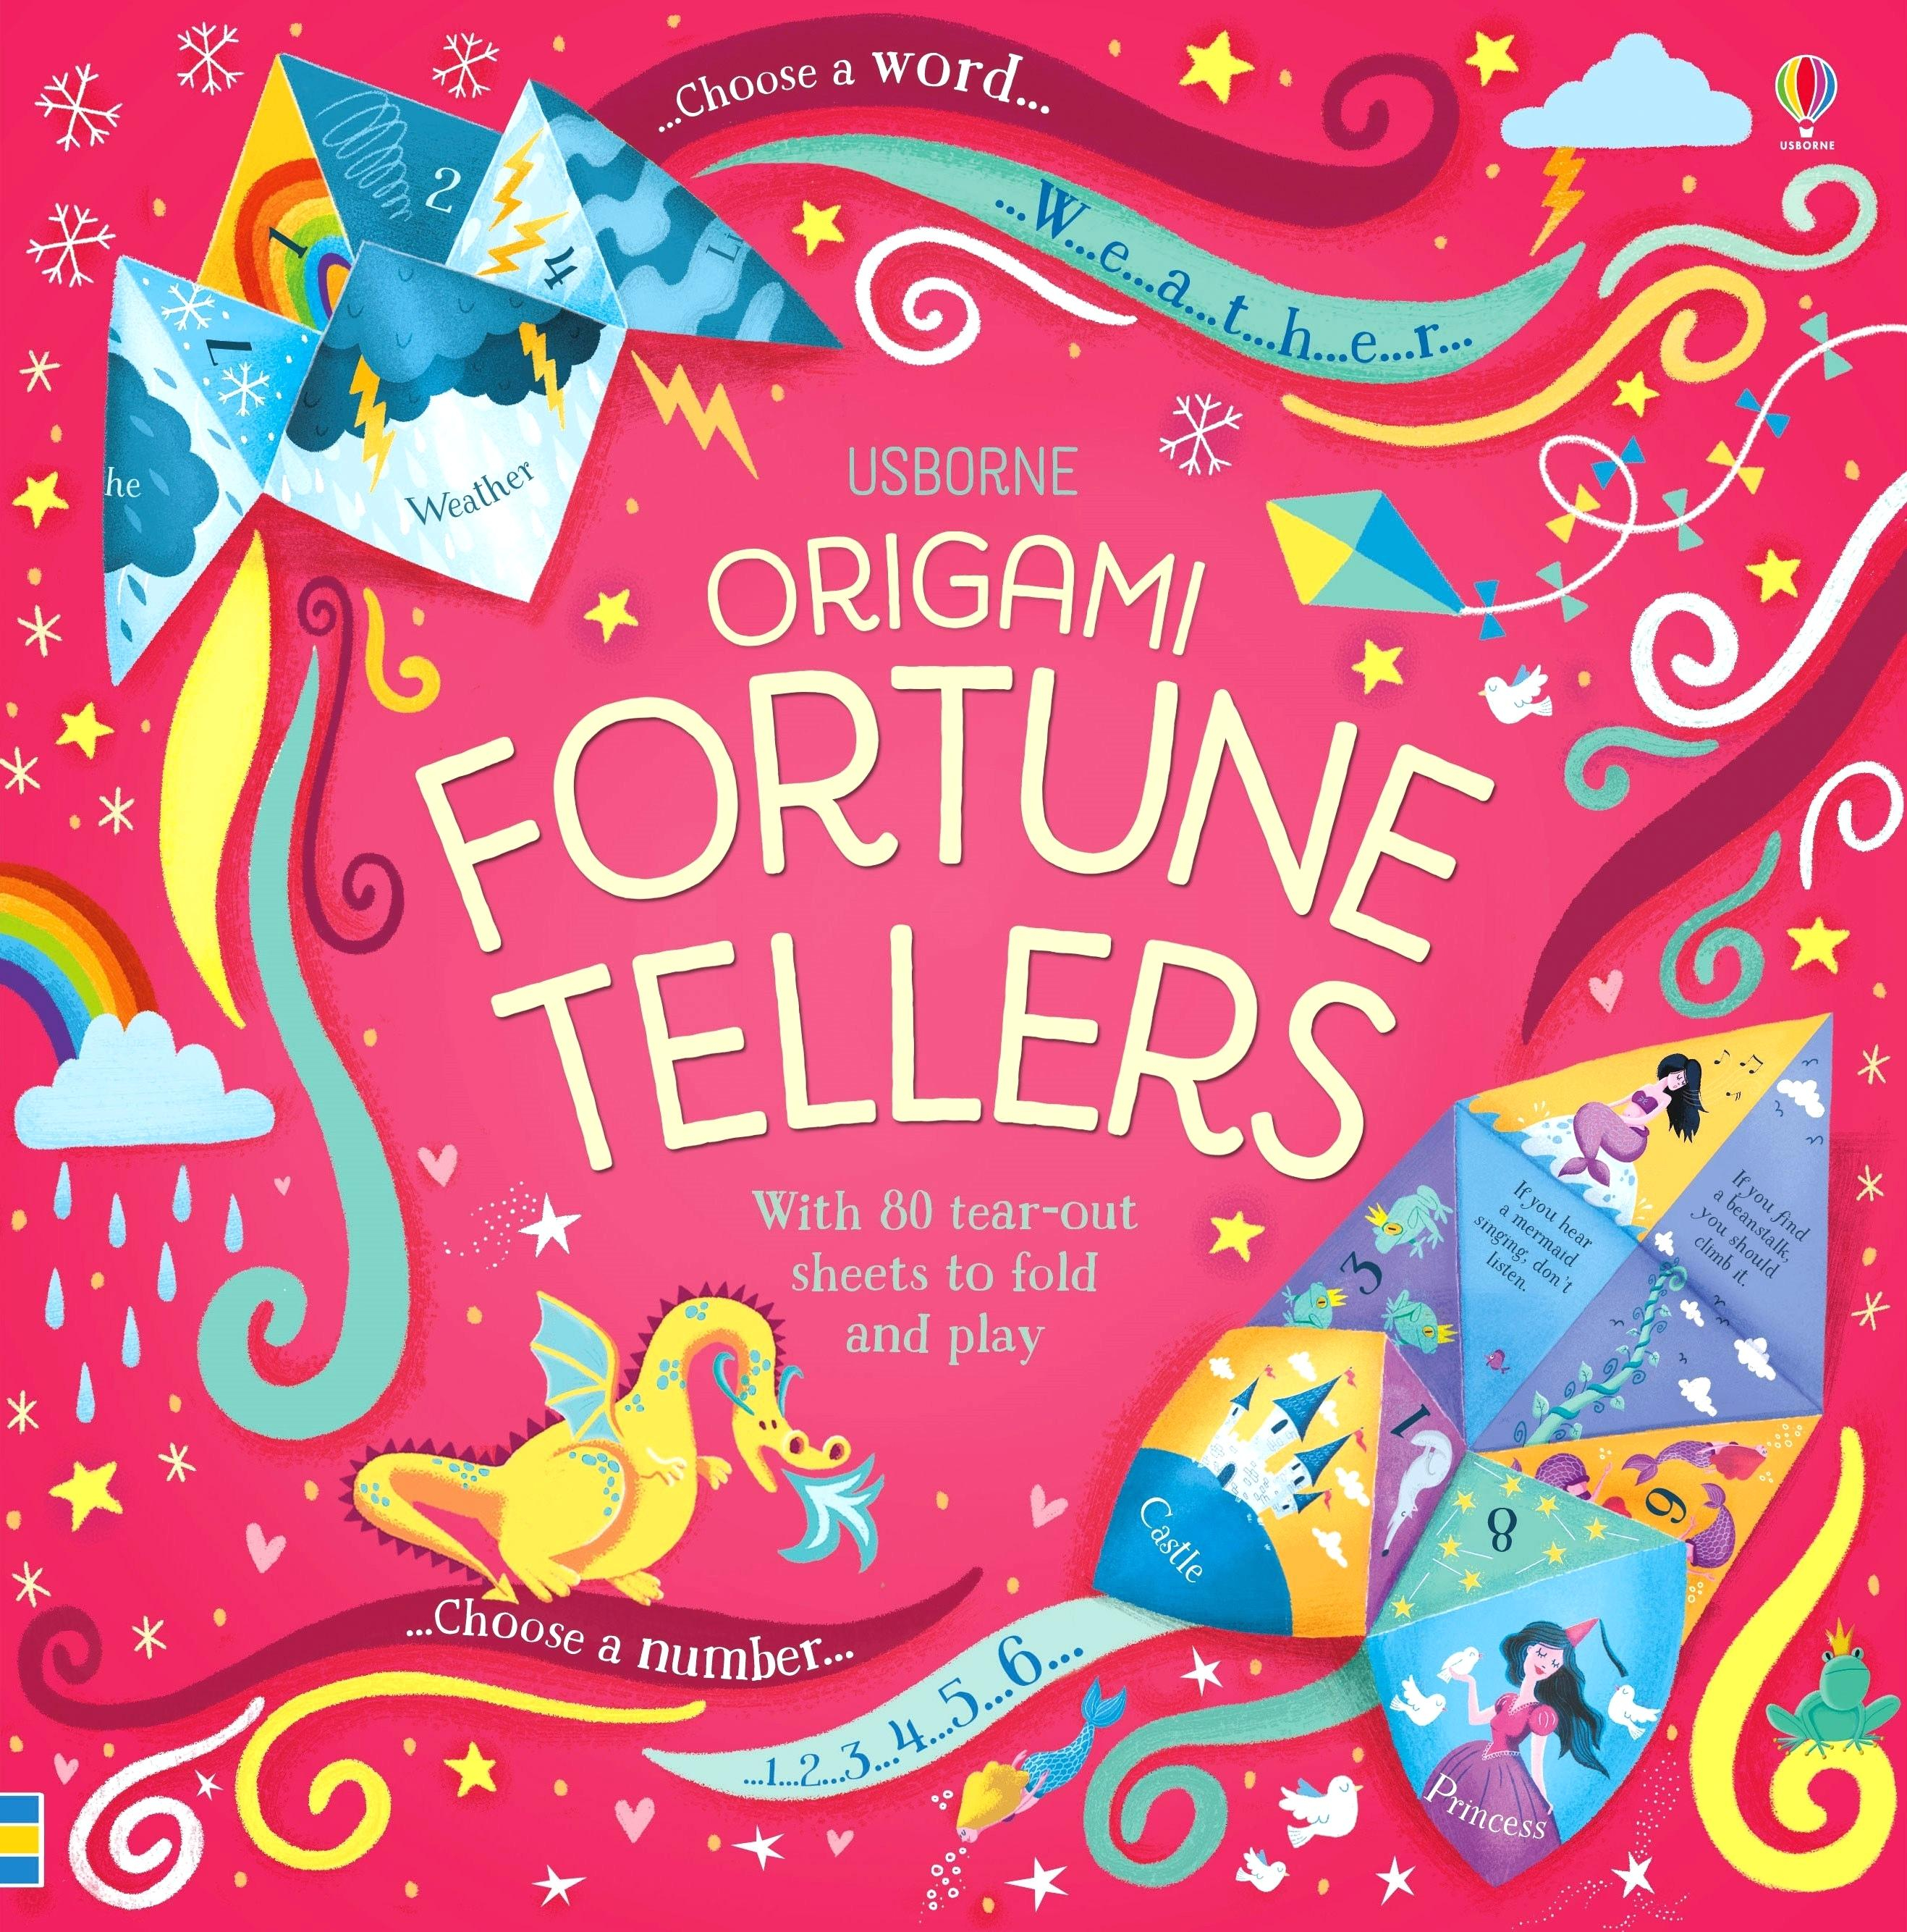 How Do You Make Origami Fortune Tellers Make Fortune Teller Origami Floodestate